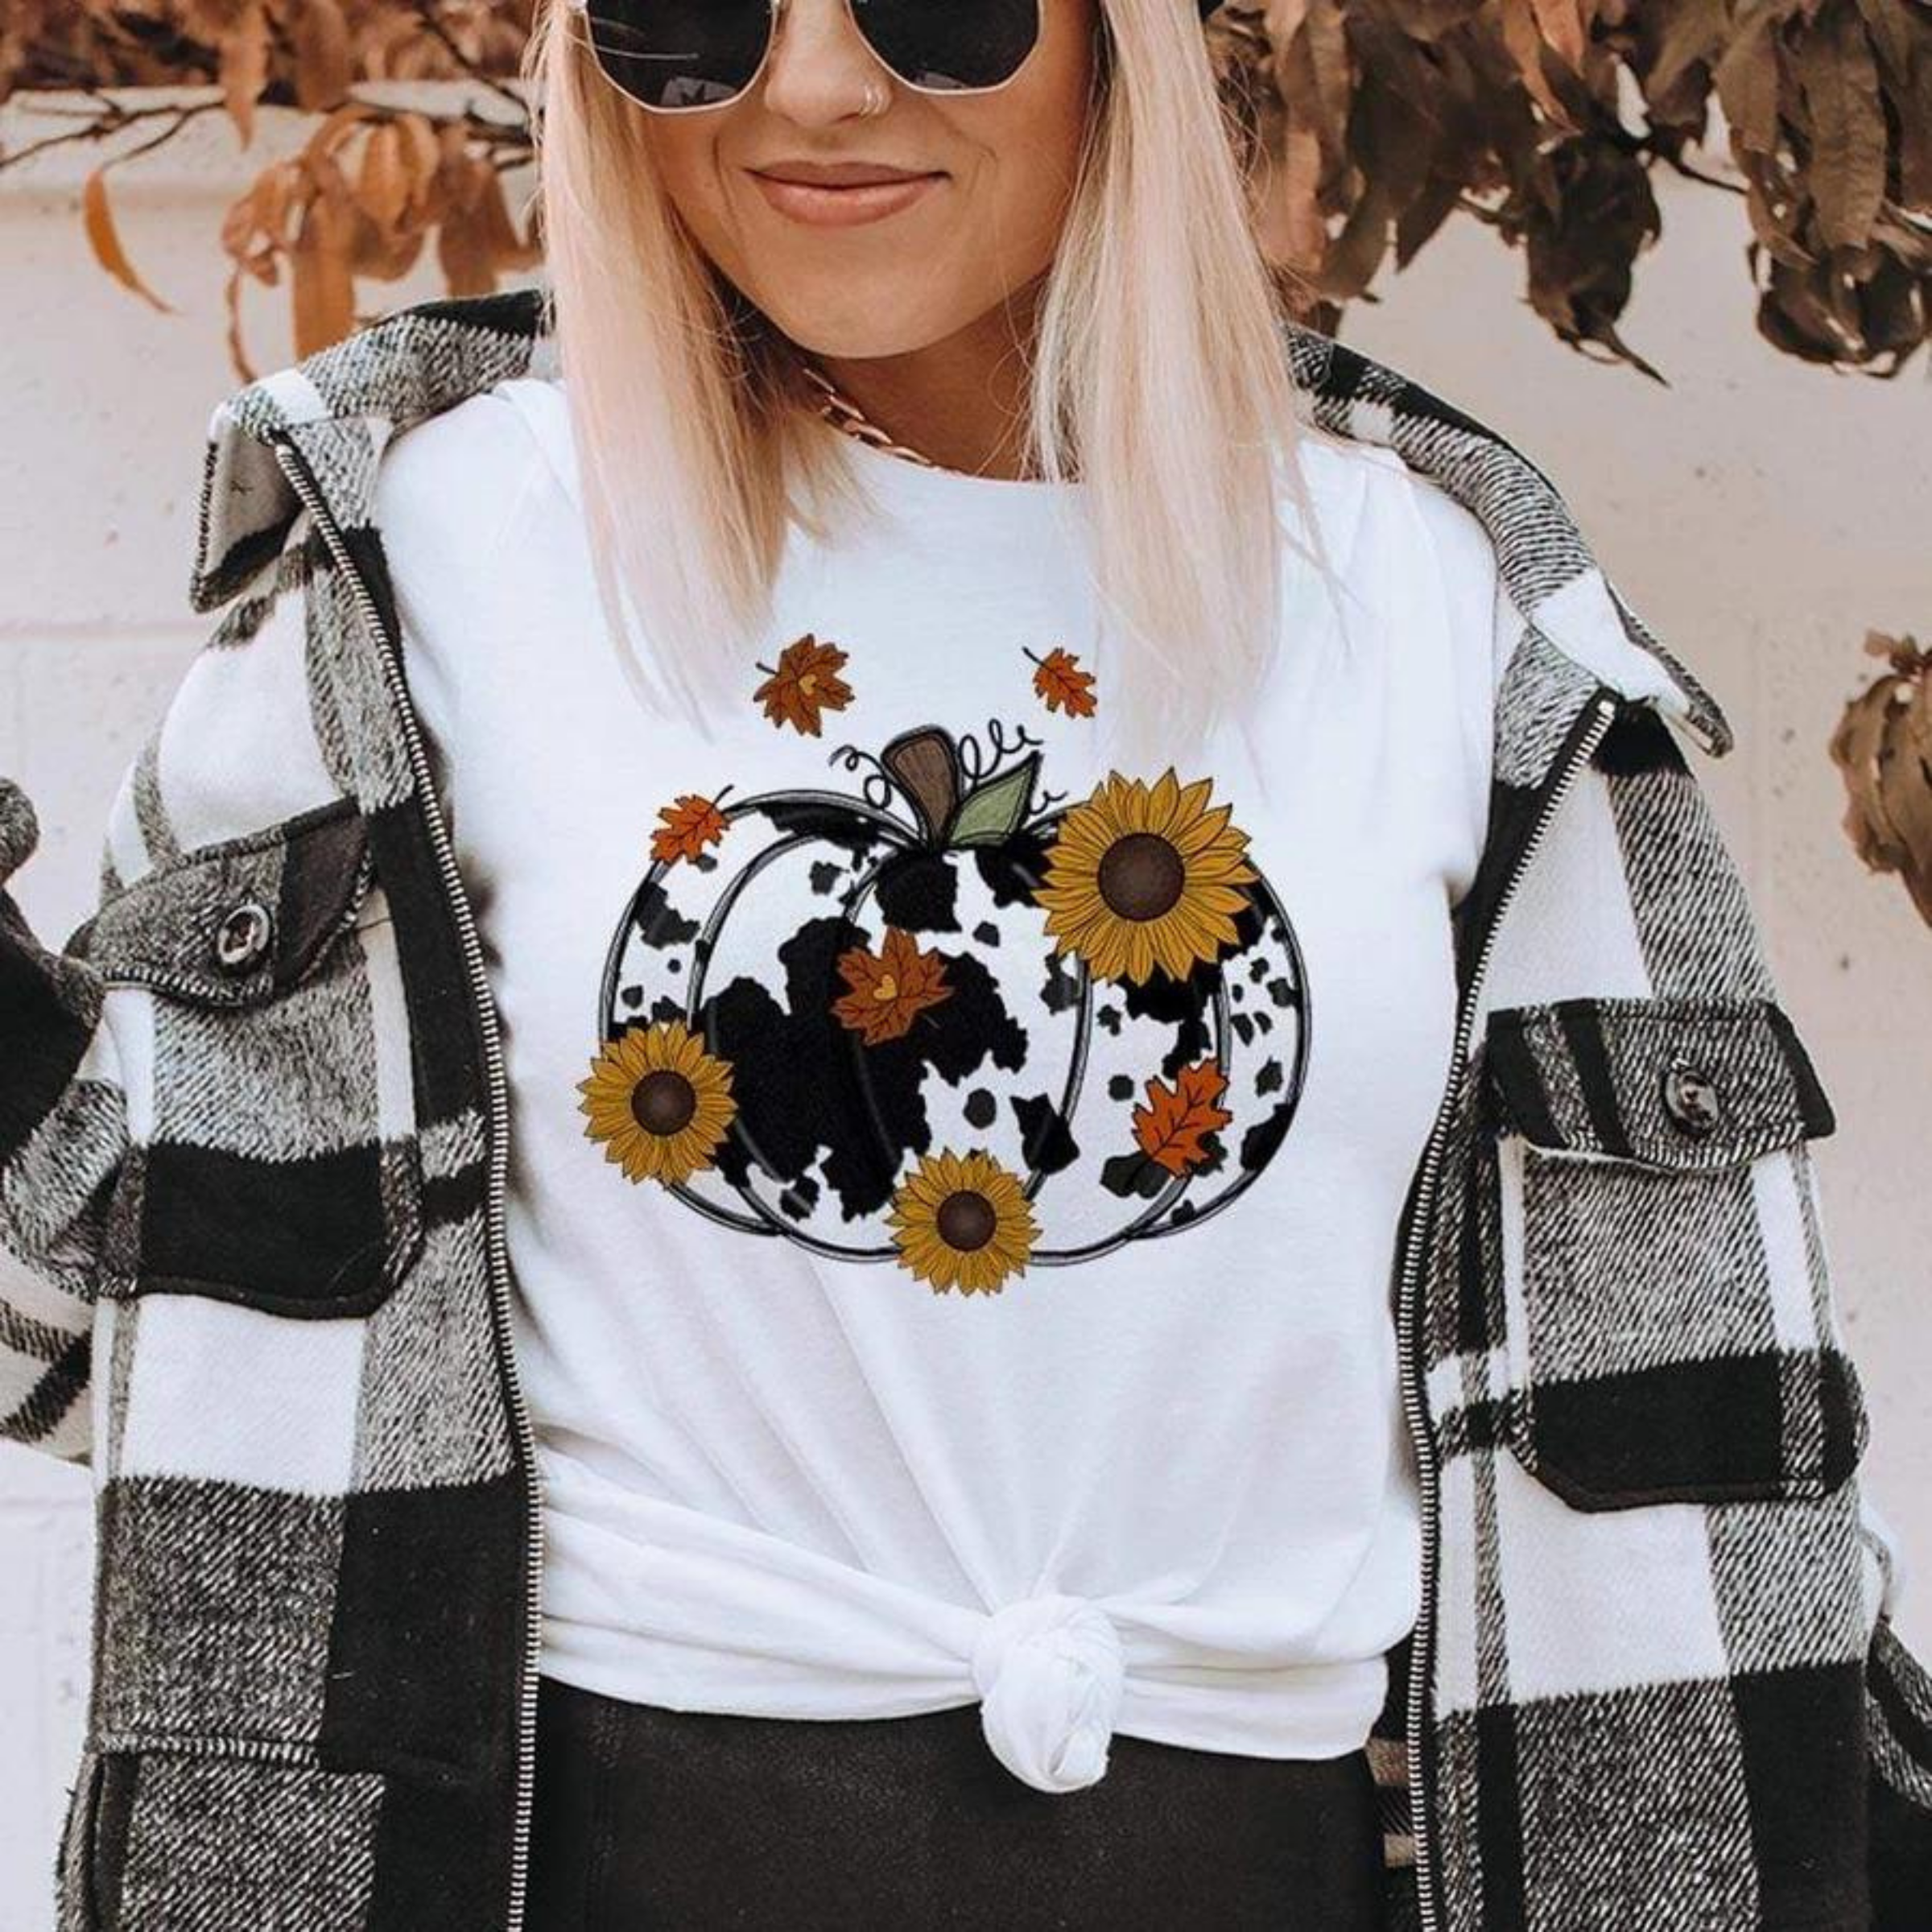 Model is wearing a white tee with a pumpkin graphic on it. The pumpkin is a cow print with sunflowers and leaves falling over top of the pumpkin. The model is also wearing a black and white buffalo plaid shacket and black pleather leggings. 